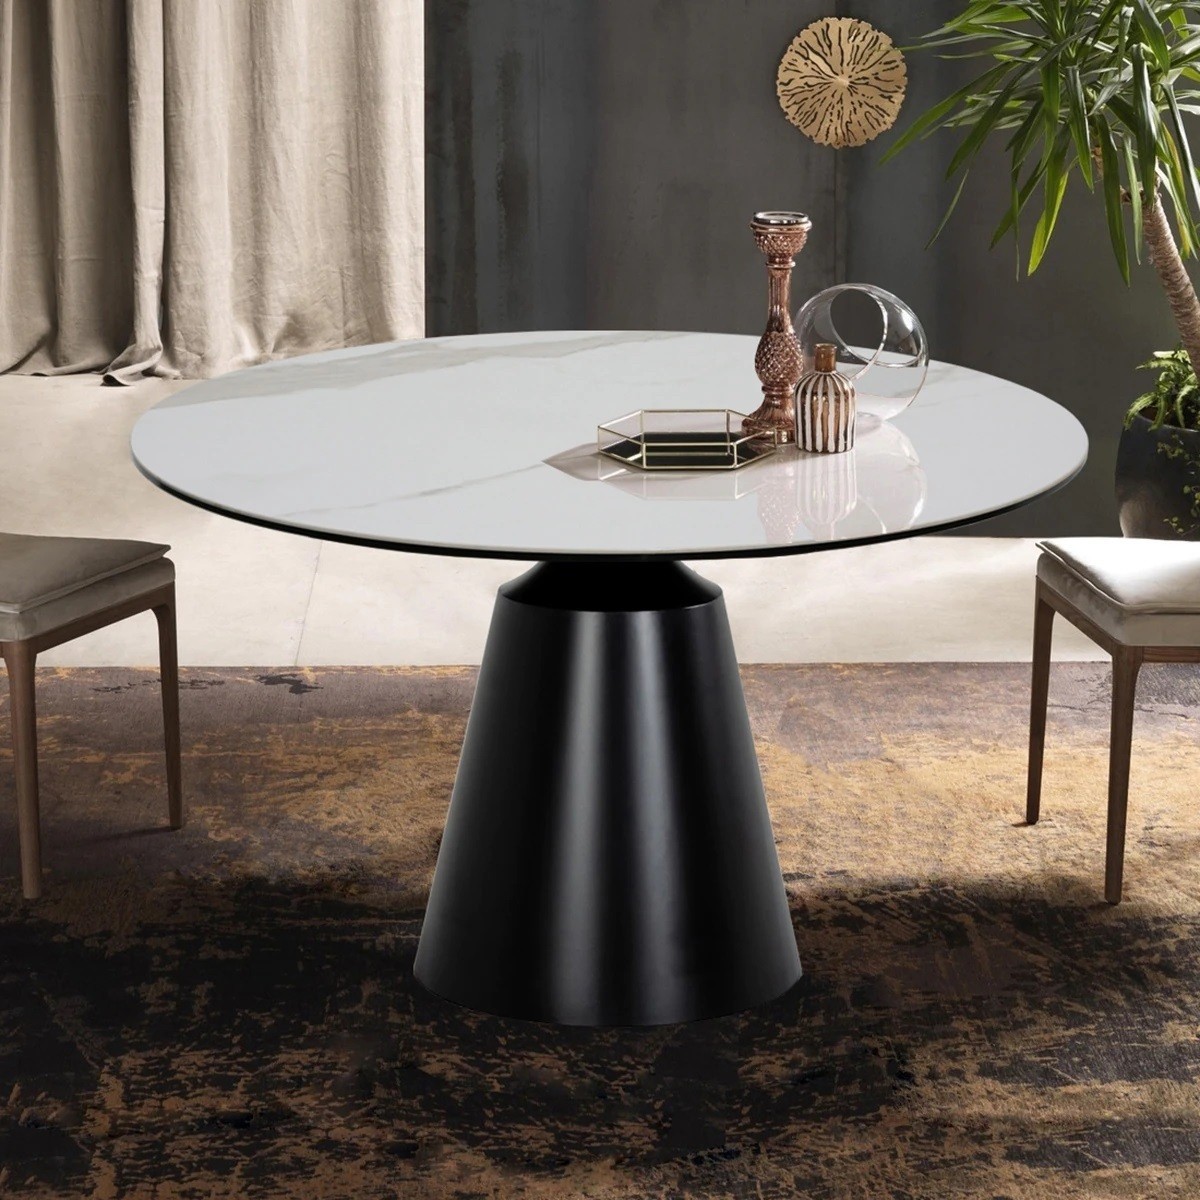 Modern Look Round Dining Table